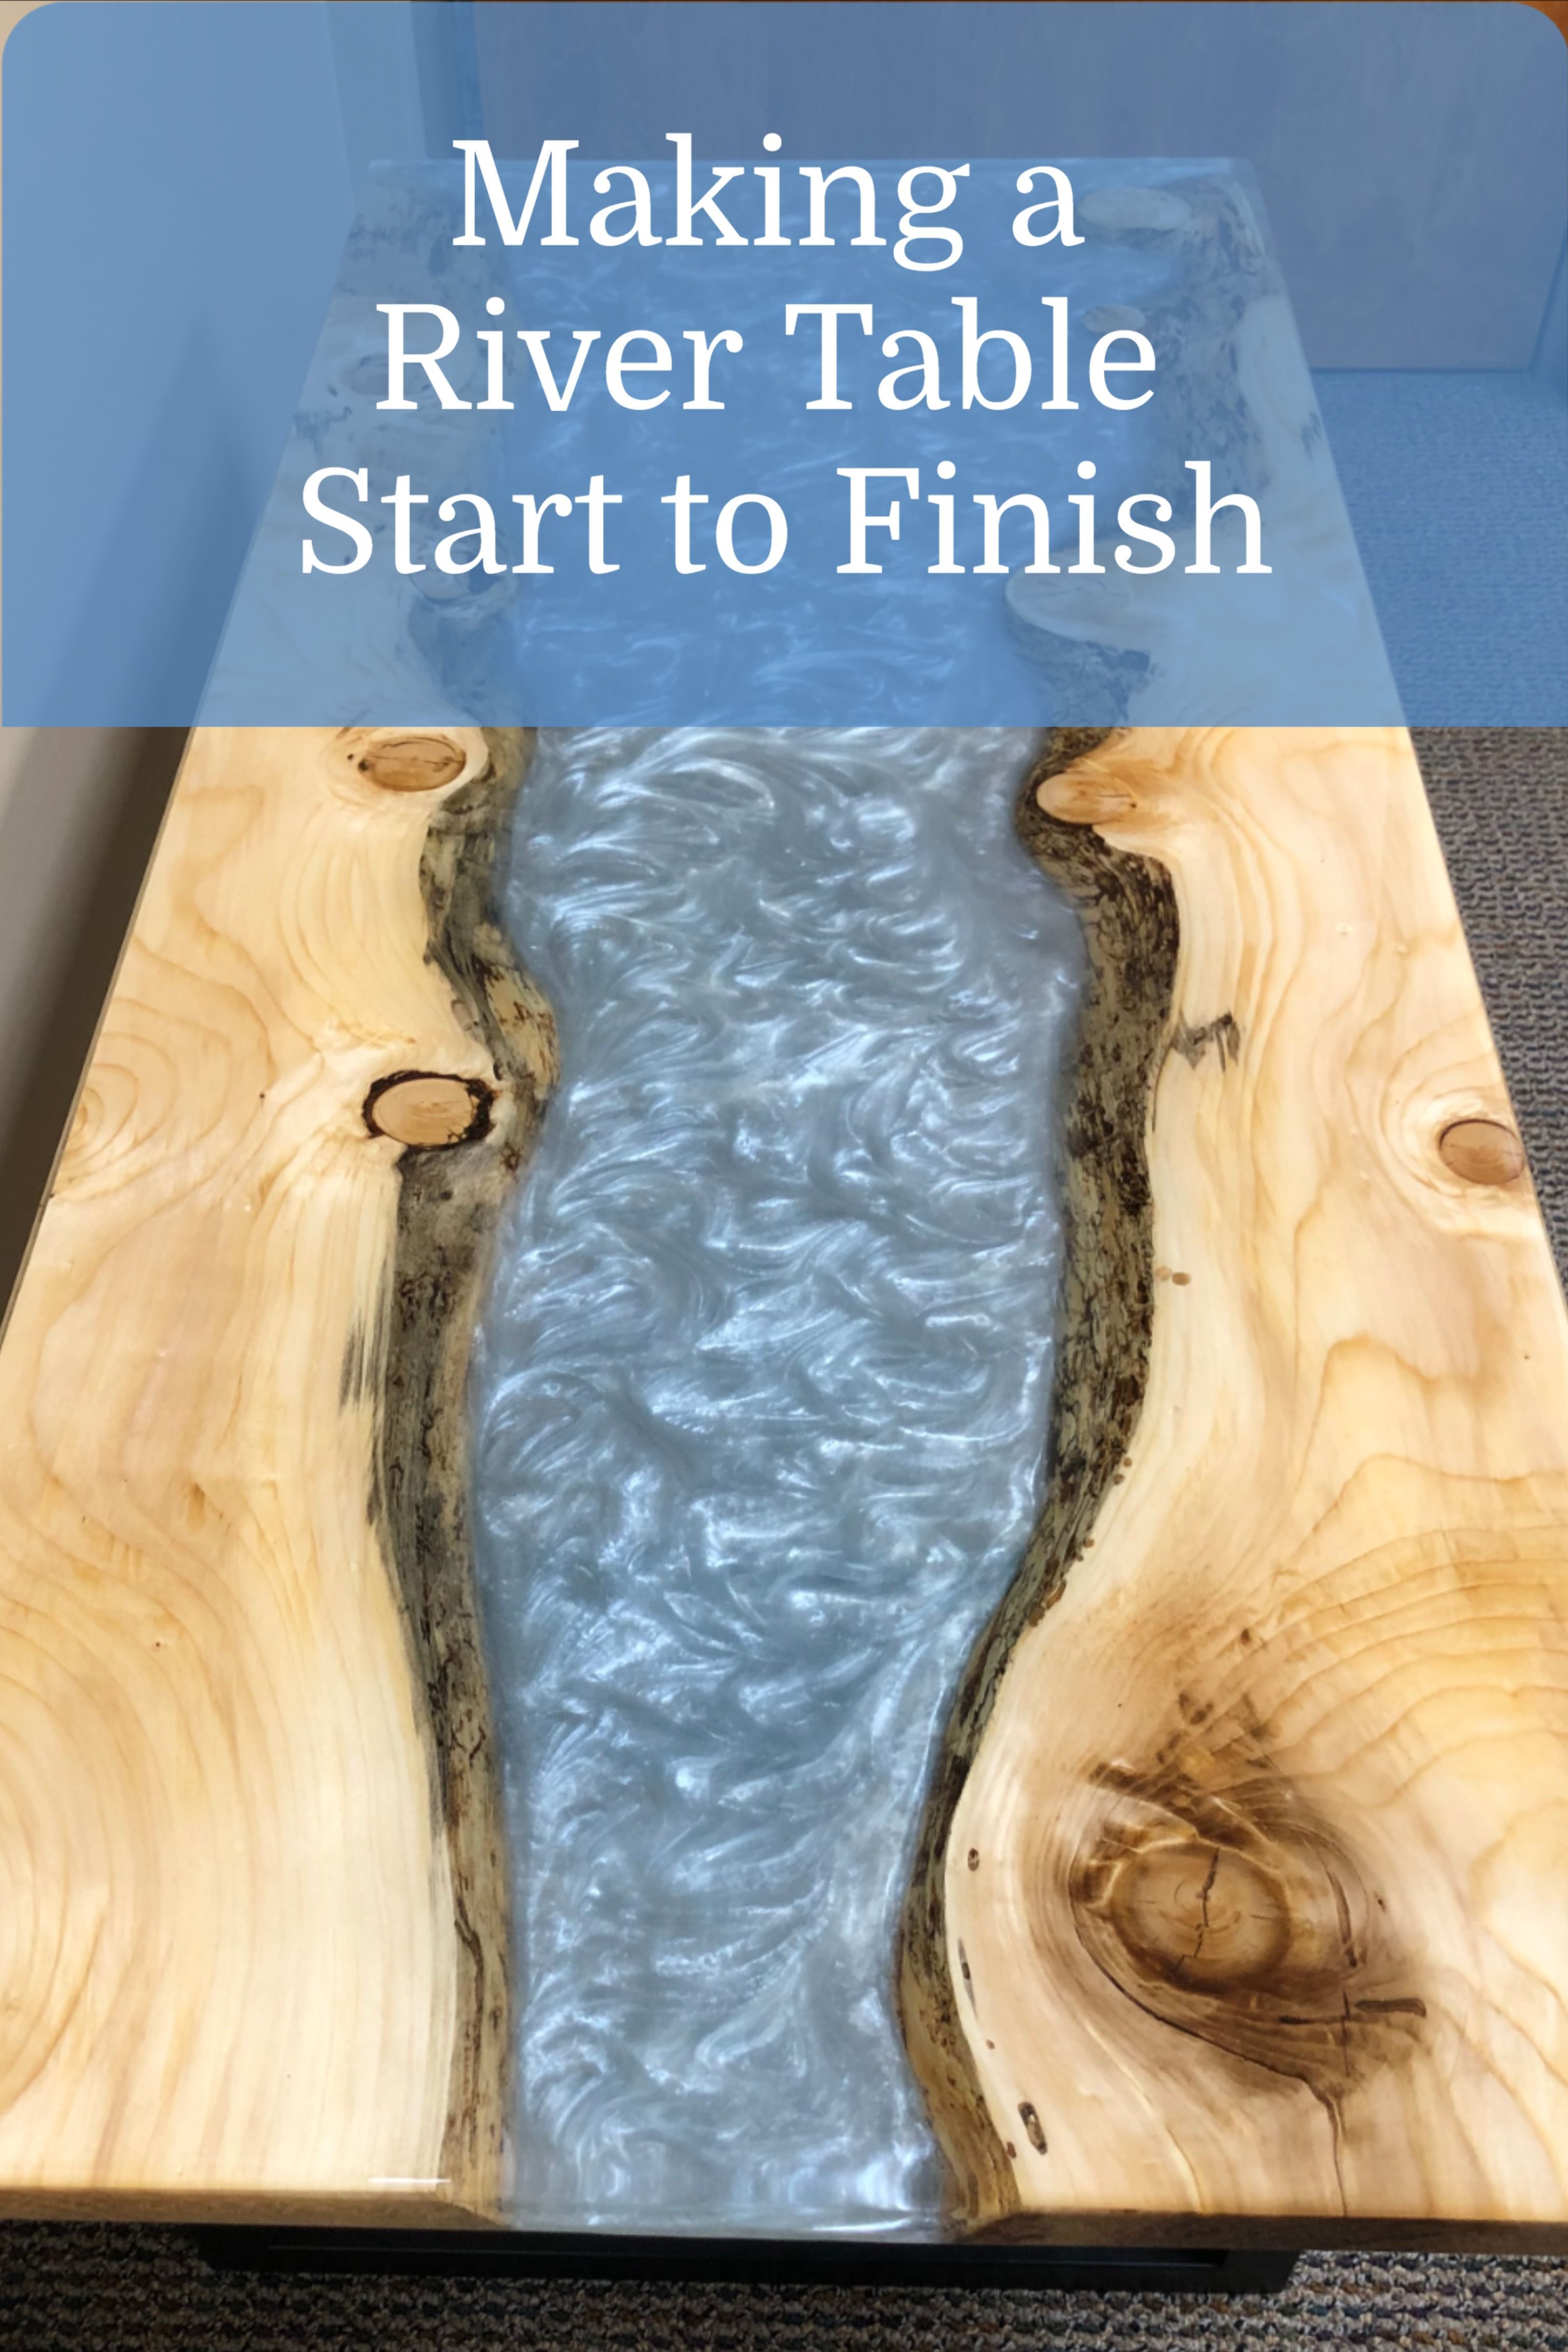 Epoxy Resin Table: How to make a river table start to finish! - Epoxy Resin Table: How to make a river table start to finish! -   19 diy Table epoxy ideas